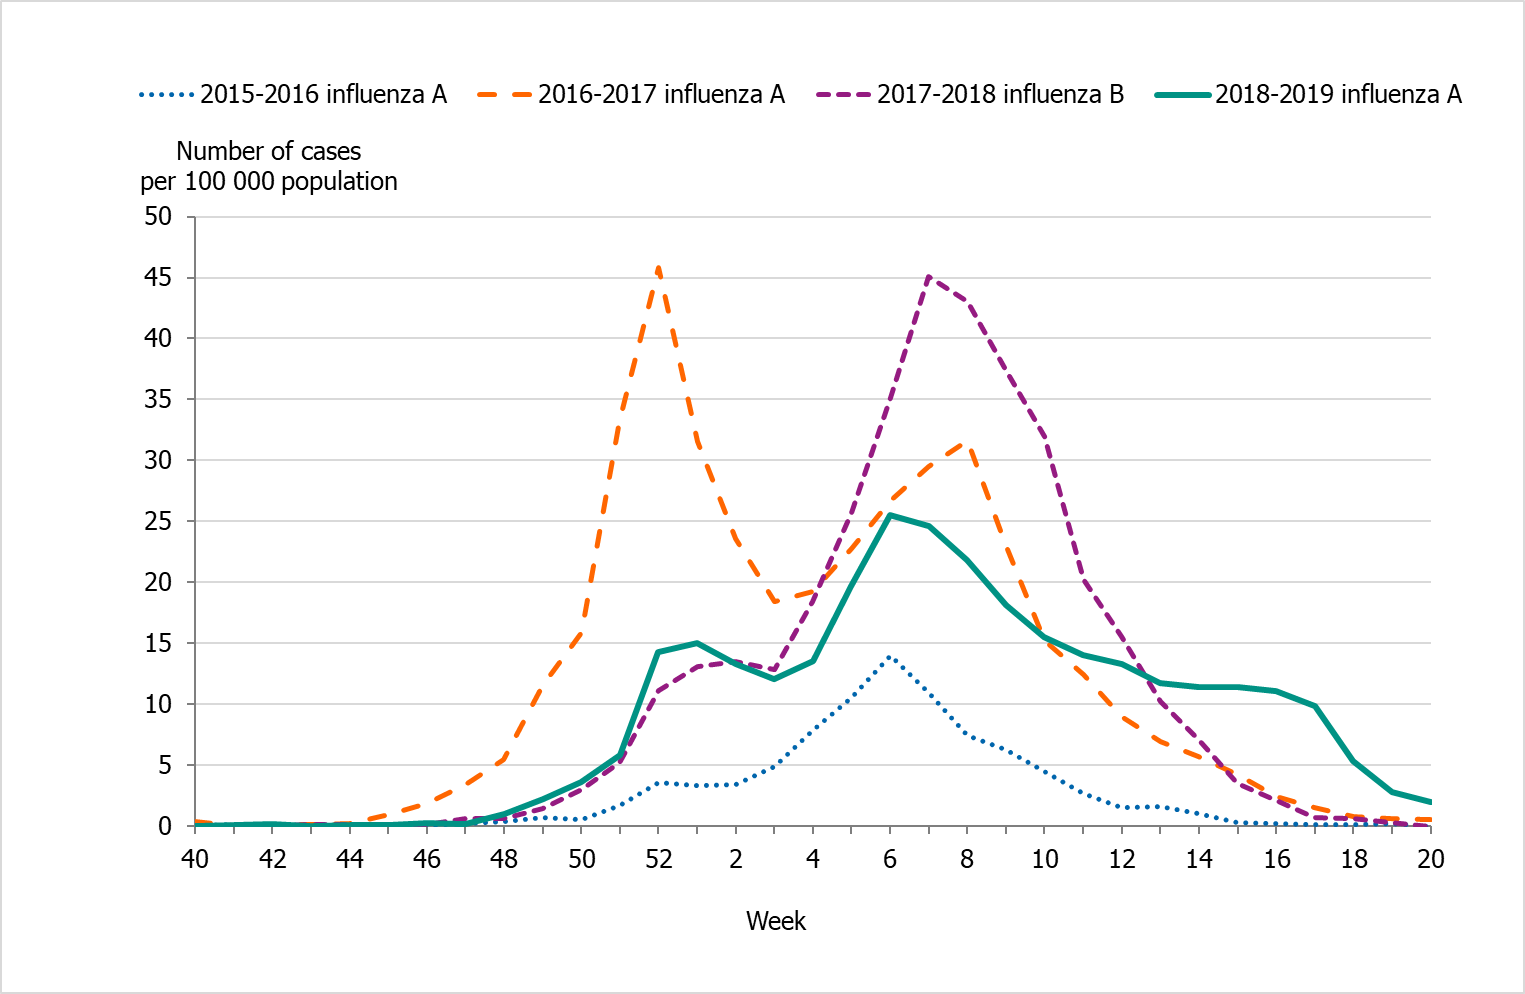 Graph showing the weekly incidence of influenza of dominating type for individuals aged 65 years and older in Sweden from season 2014 to 2019.